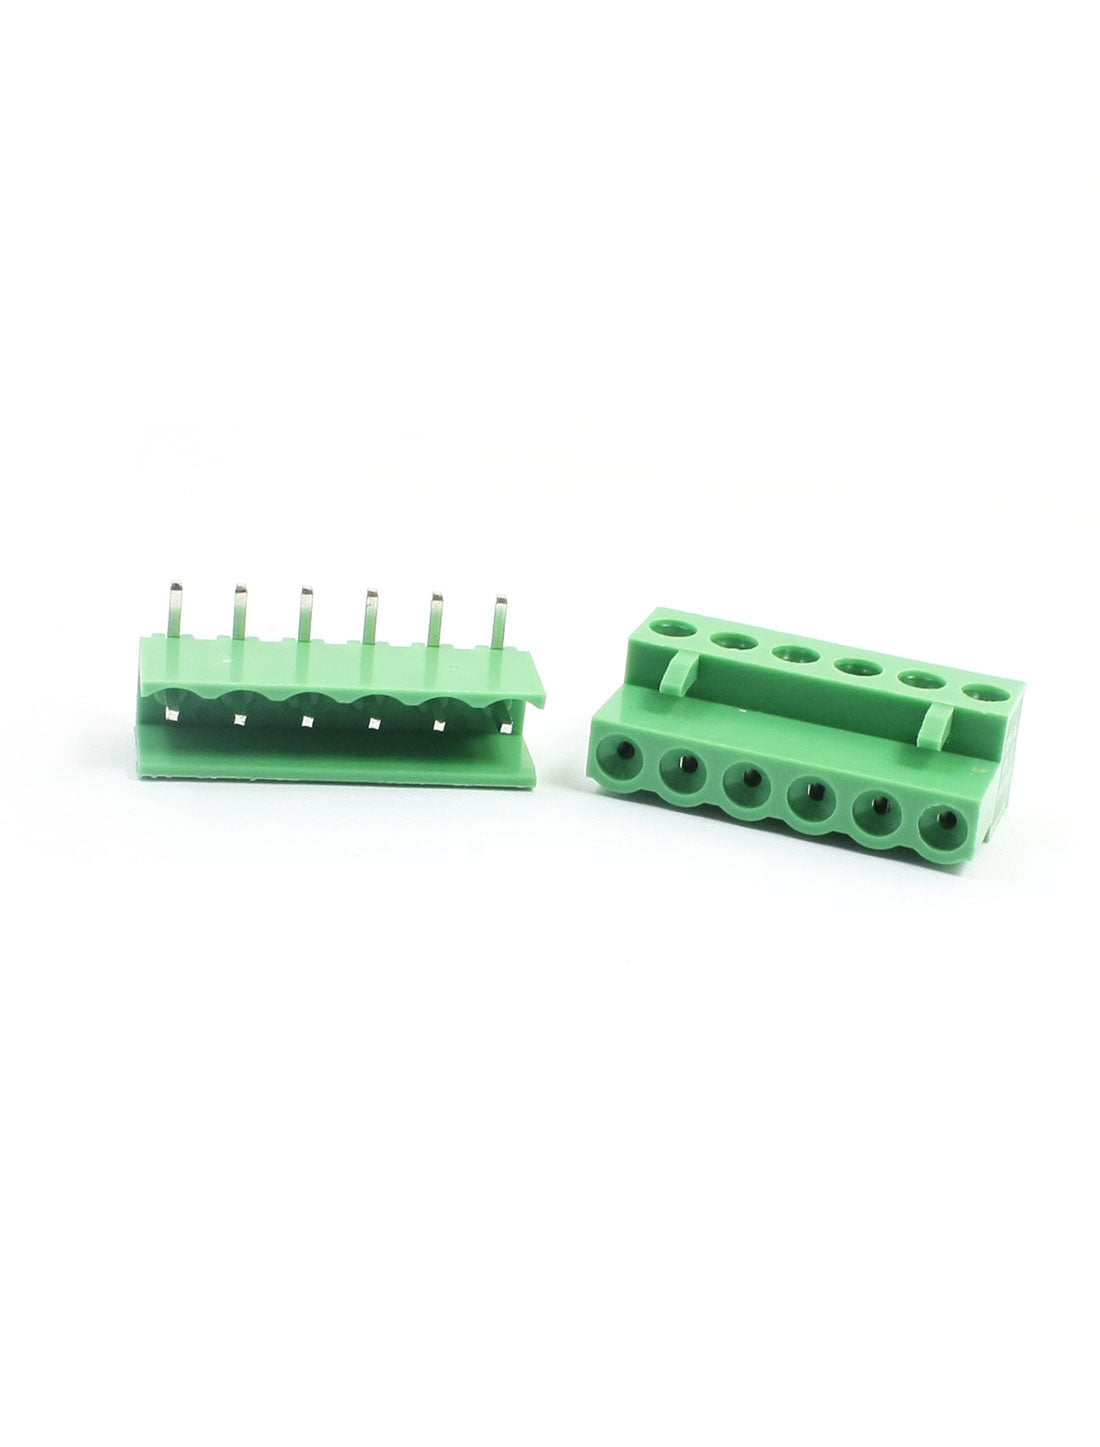 uxcell Uxcell 5 Pcs AC300V 10A 5.08mm Pitch 6-Pin Pluggable Type Through Hole PCB Terminal Barrier Block Connector for 14-26AWG Wire